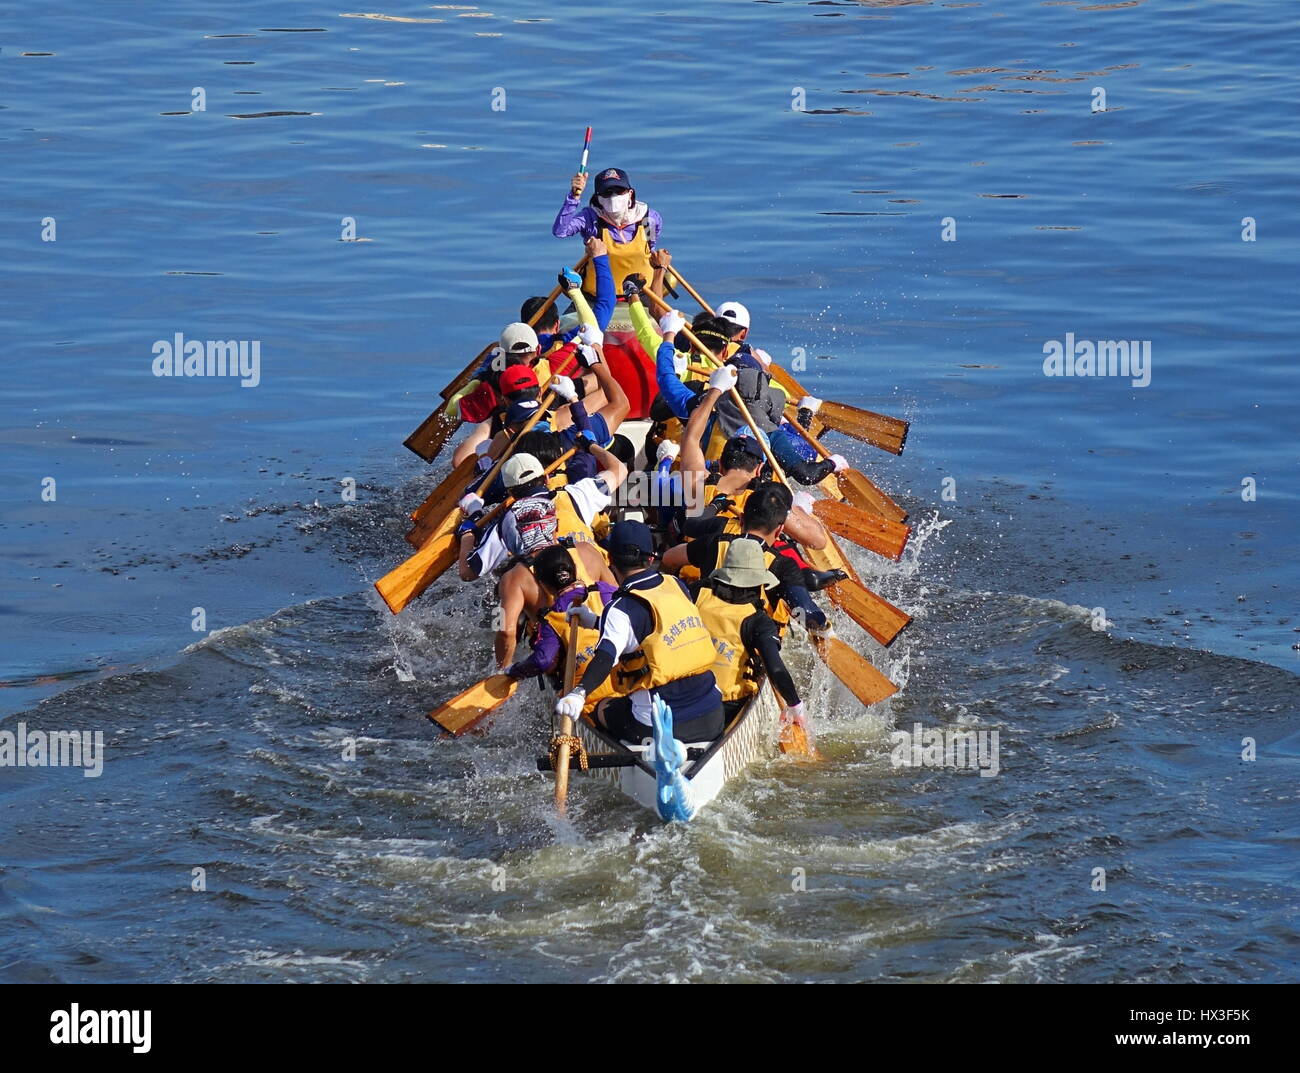 KAOHSIUNG, TAIWAN -- JUNE 18, 2015: An unidentified team competes in the 2015 Dragon Boat Races on the Love River in Kaohsiung City. Stock Photo